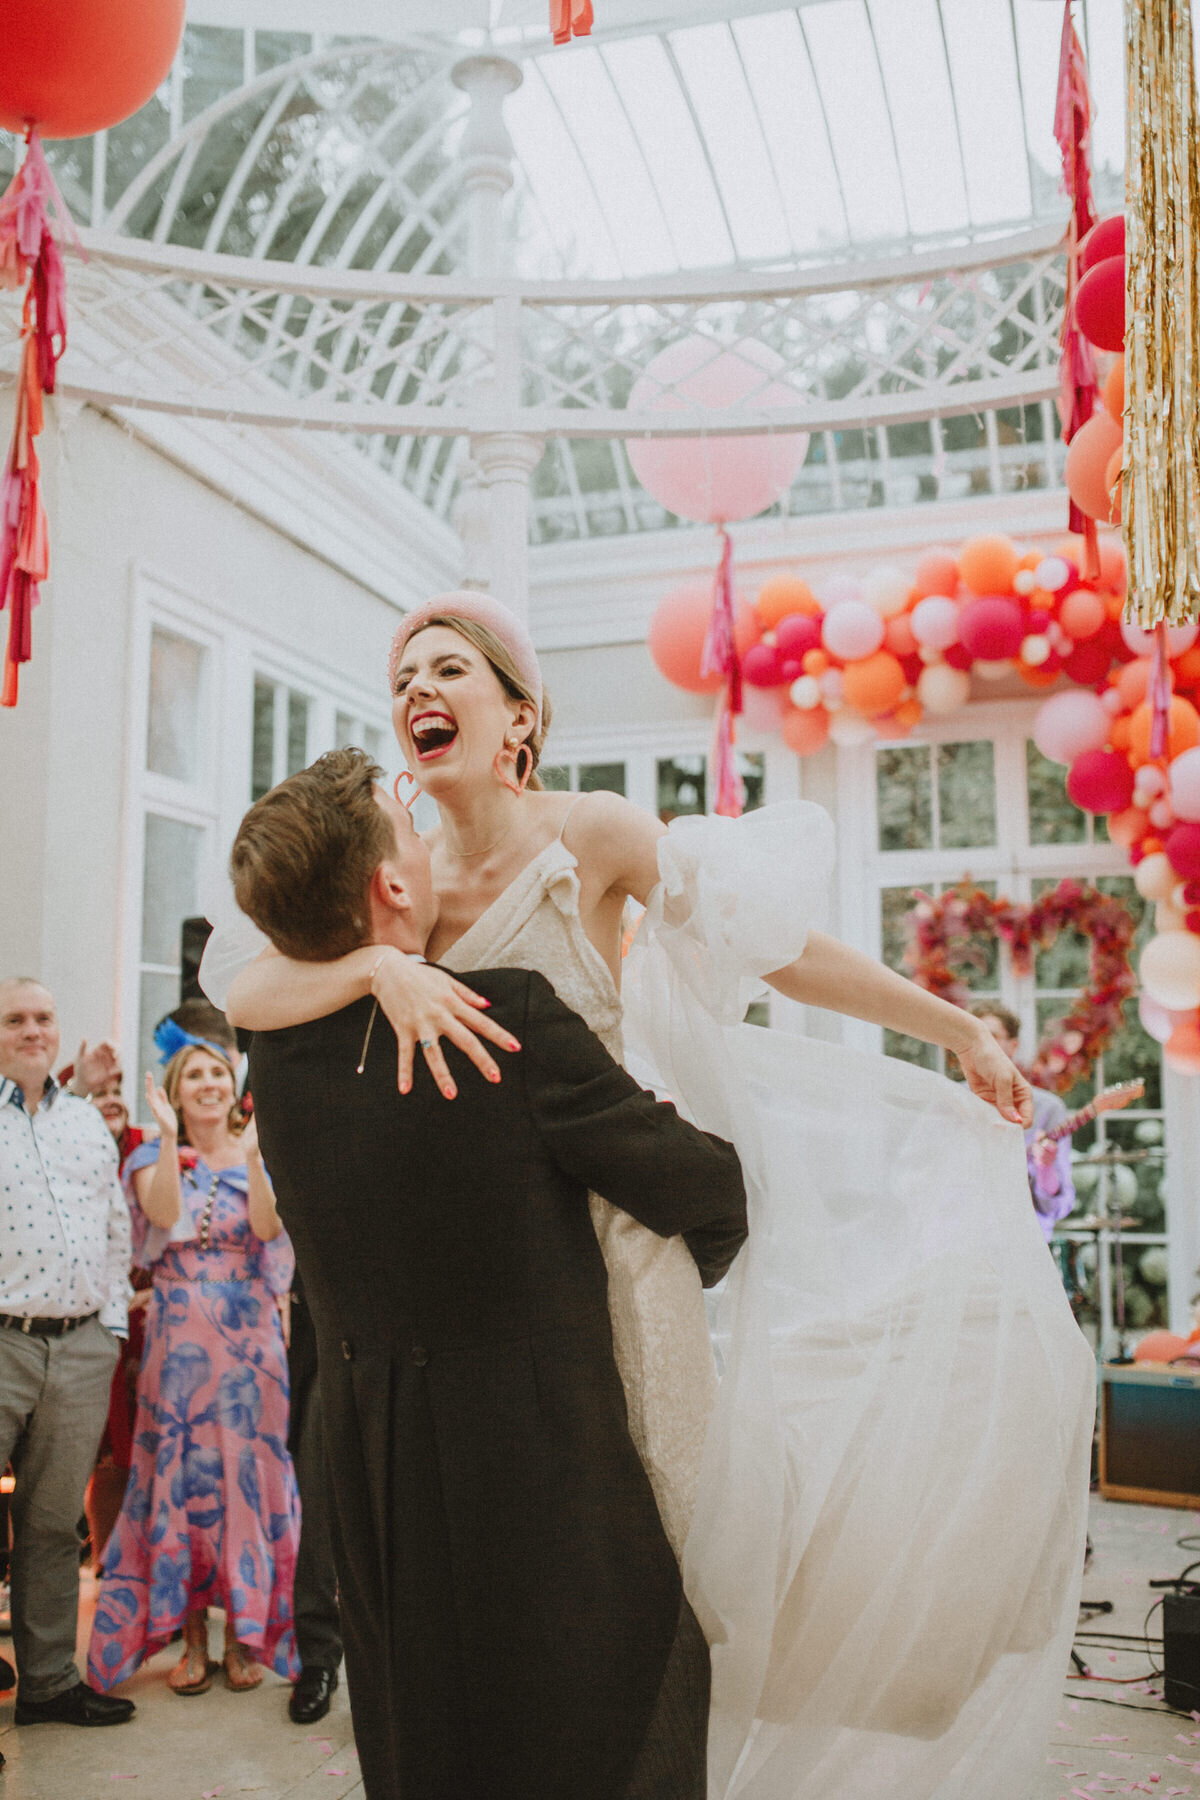 groom lifting bride at wedding celebration in domed conservatory